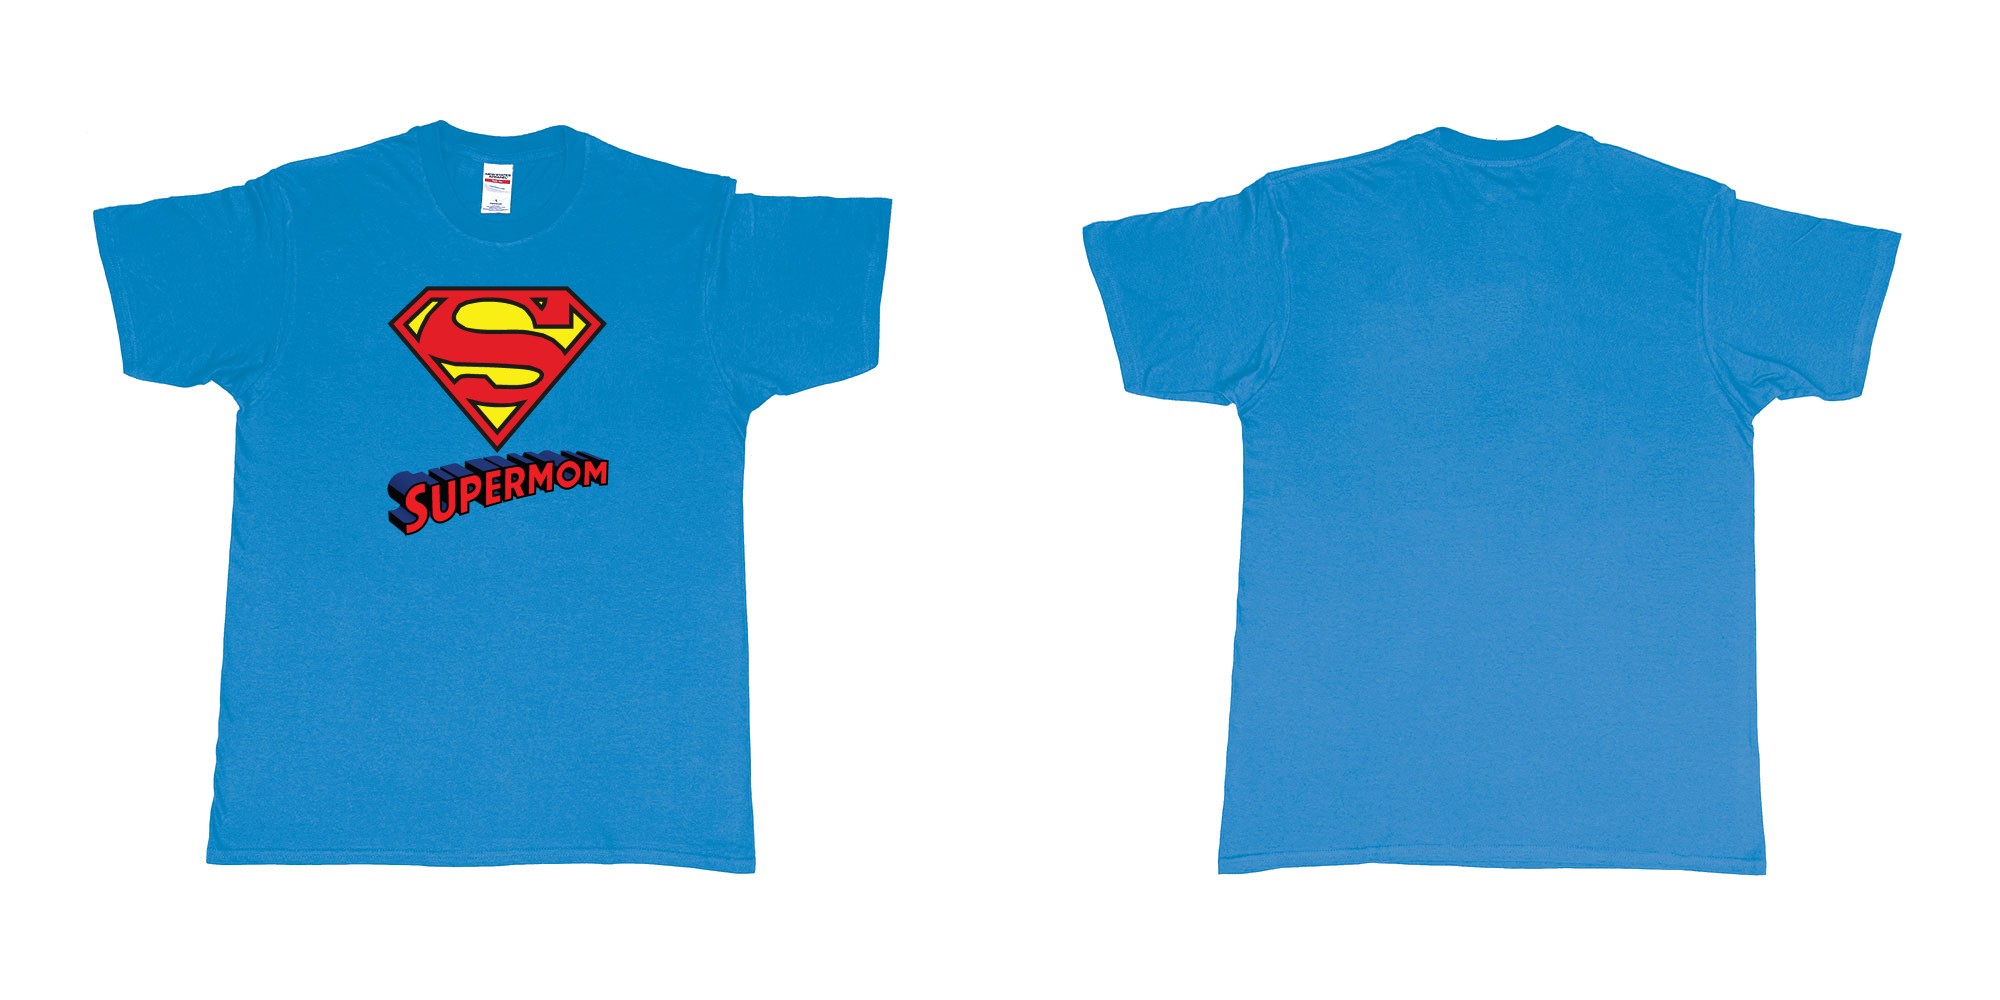 Custom tshirt design superman logo with own custom text print bali in fabric color sapphire choice your own text made in Bali by The Pirate Way